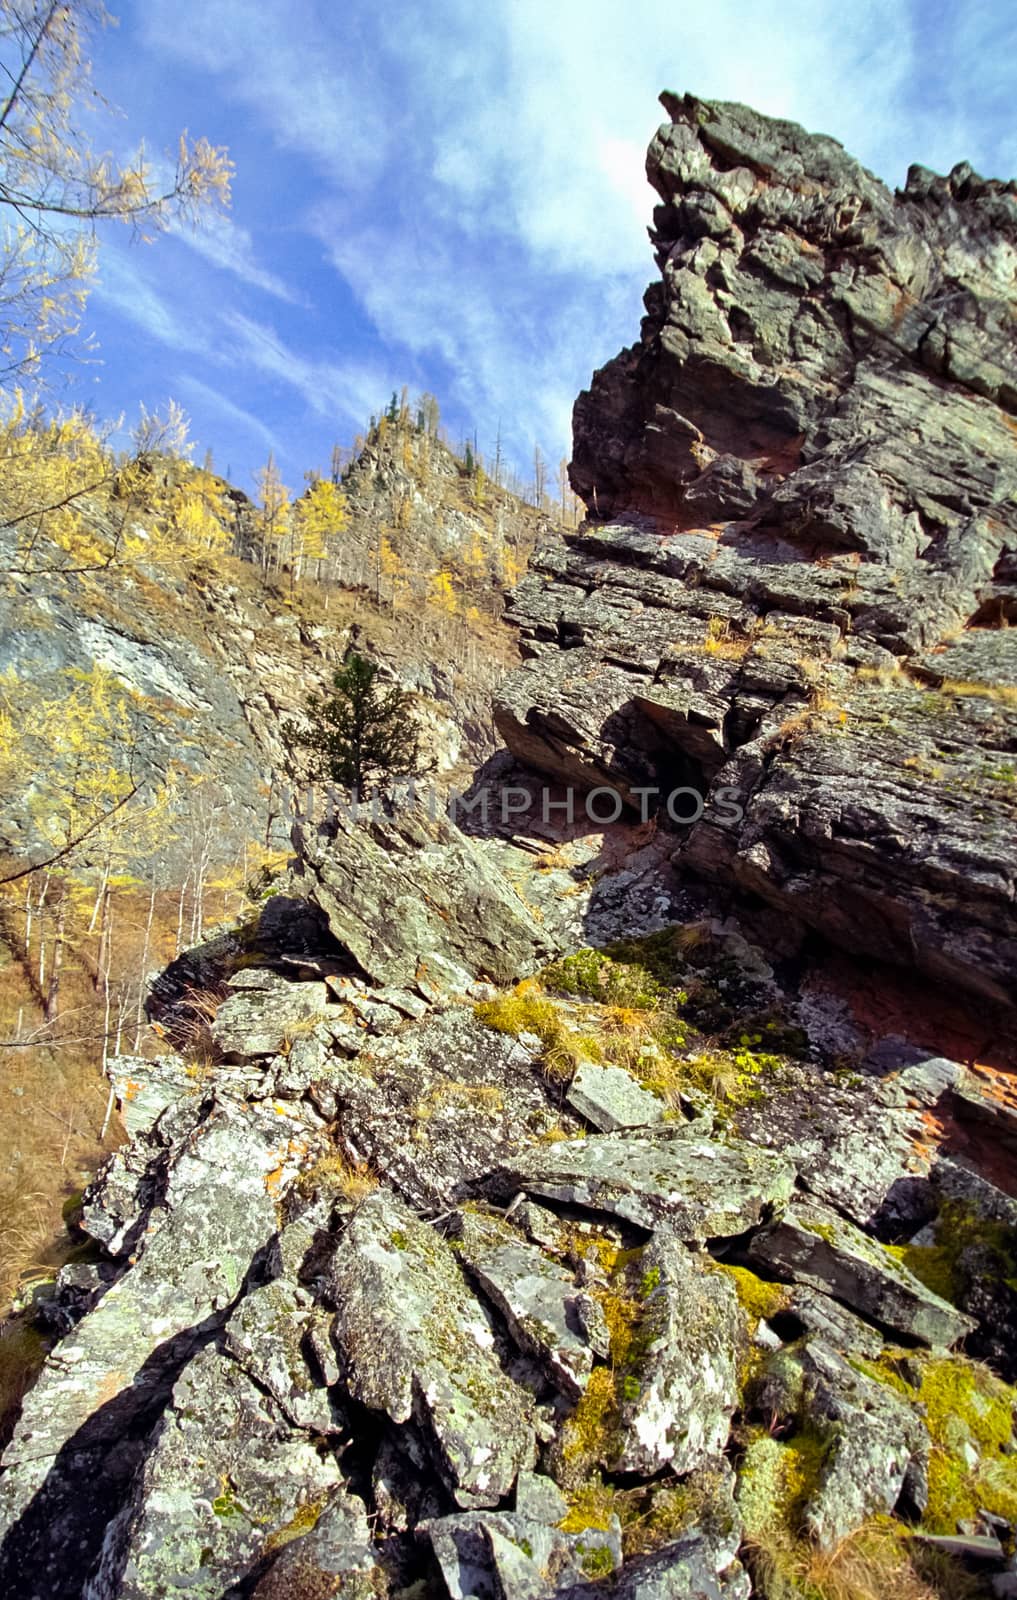 The mountains of the sayans. The nature of the mountains is sayan. Vegetation in the mountains